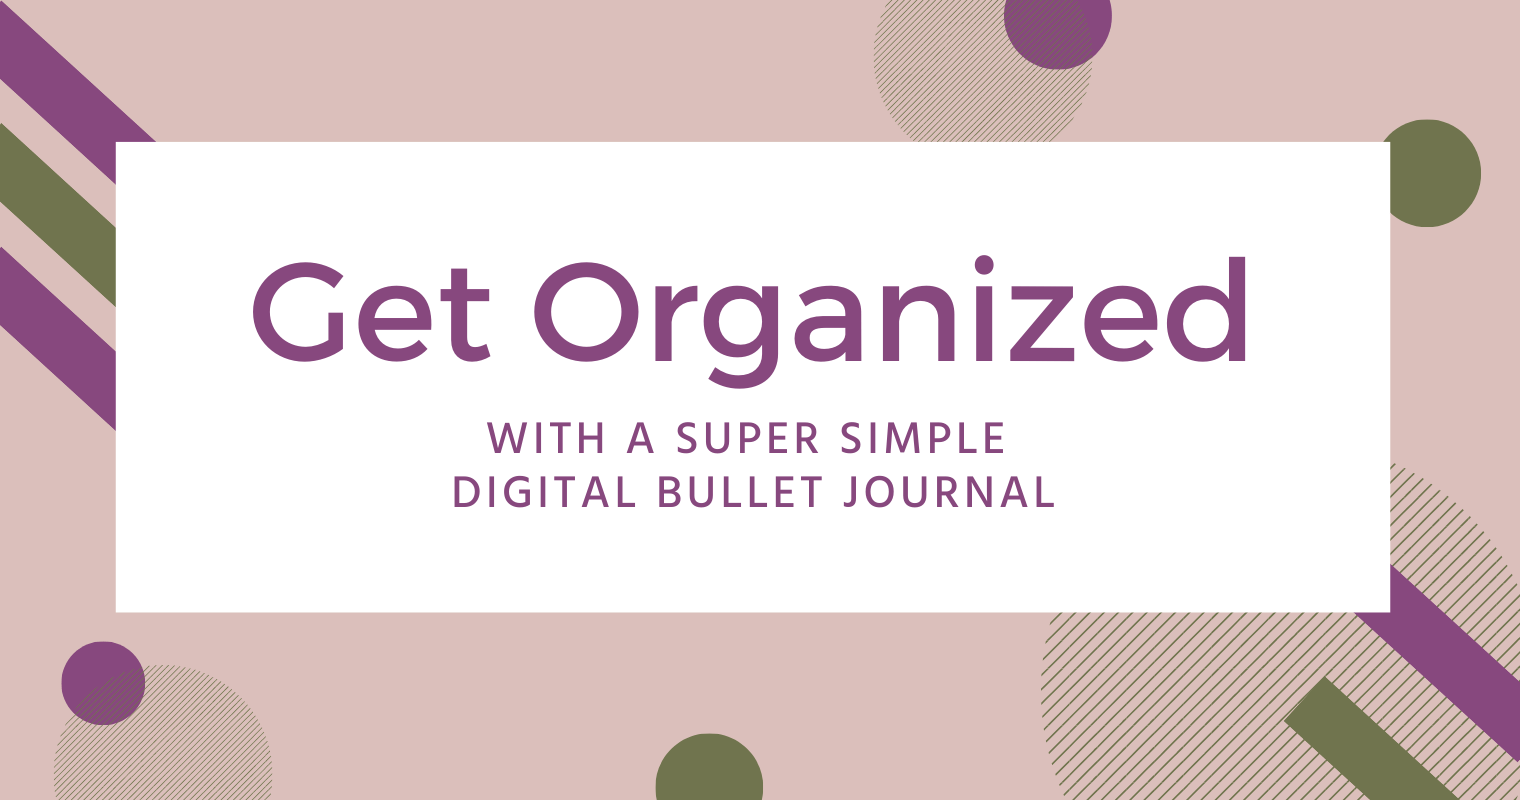 Want to get organized in a simple, portable way? Check out my OneNote Bullet Journal method.